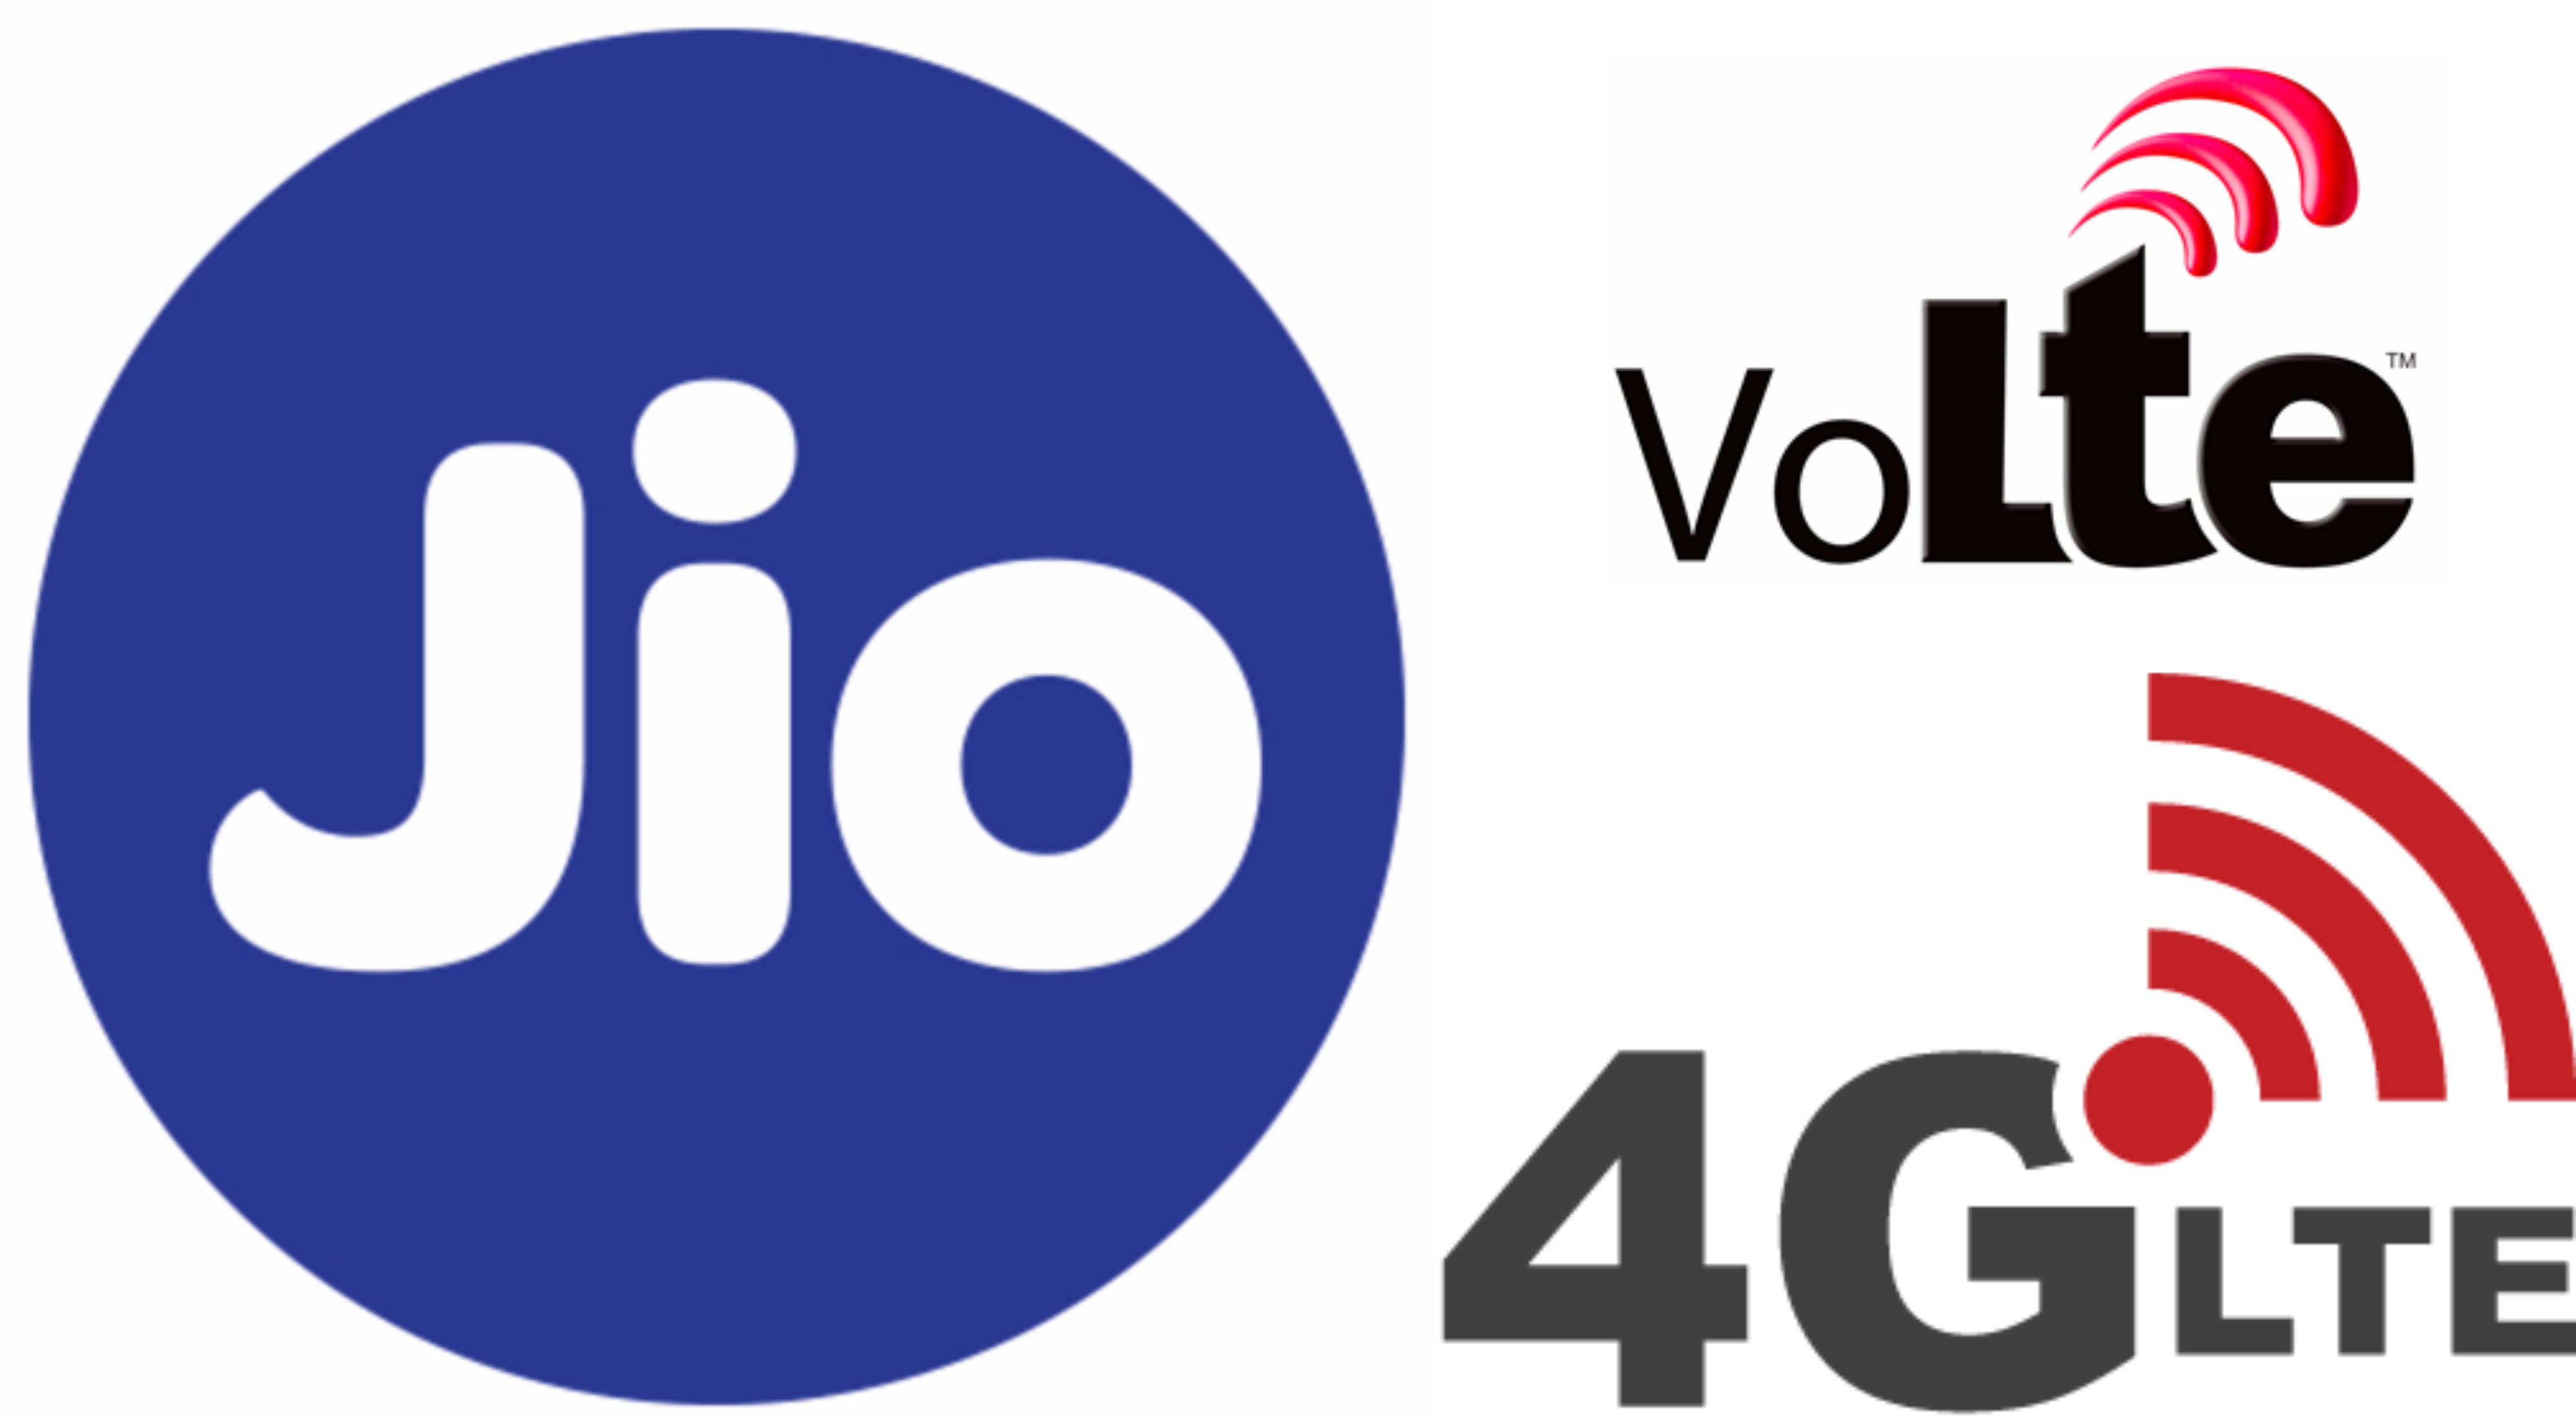 List of Smartphones with 4G LTE or VoLTE Support for Jio